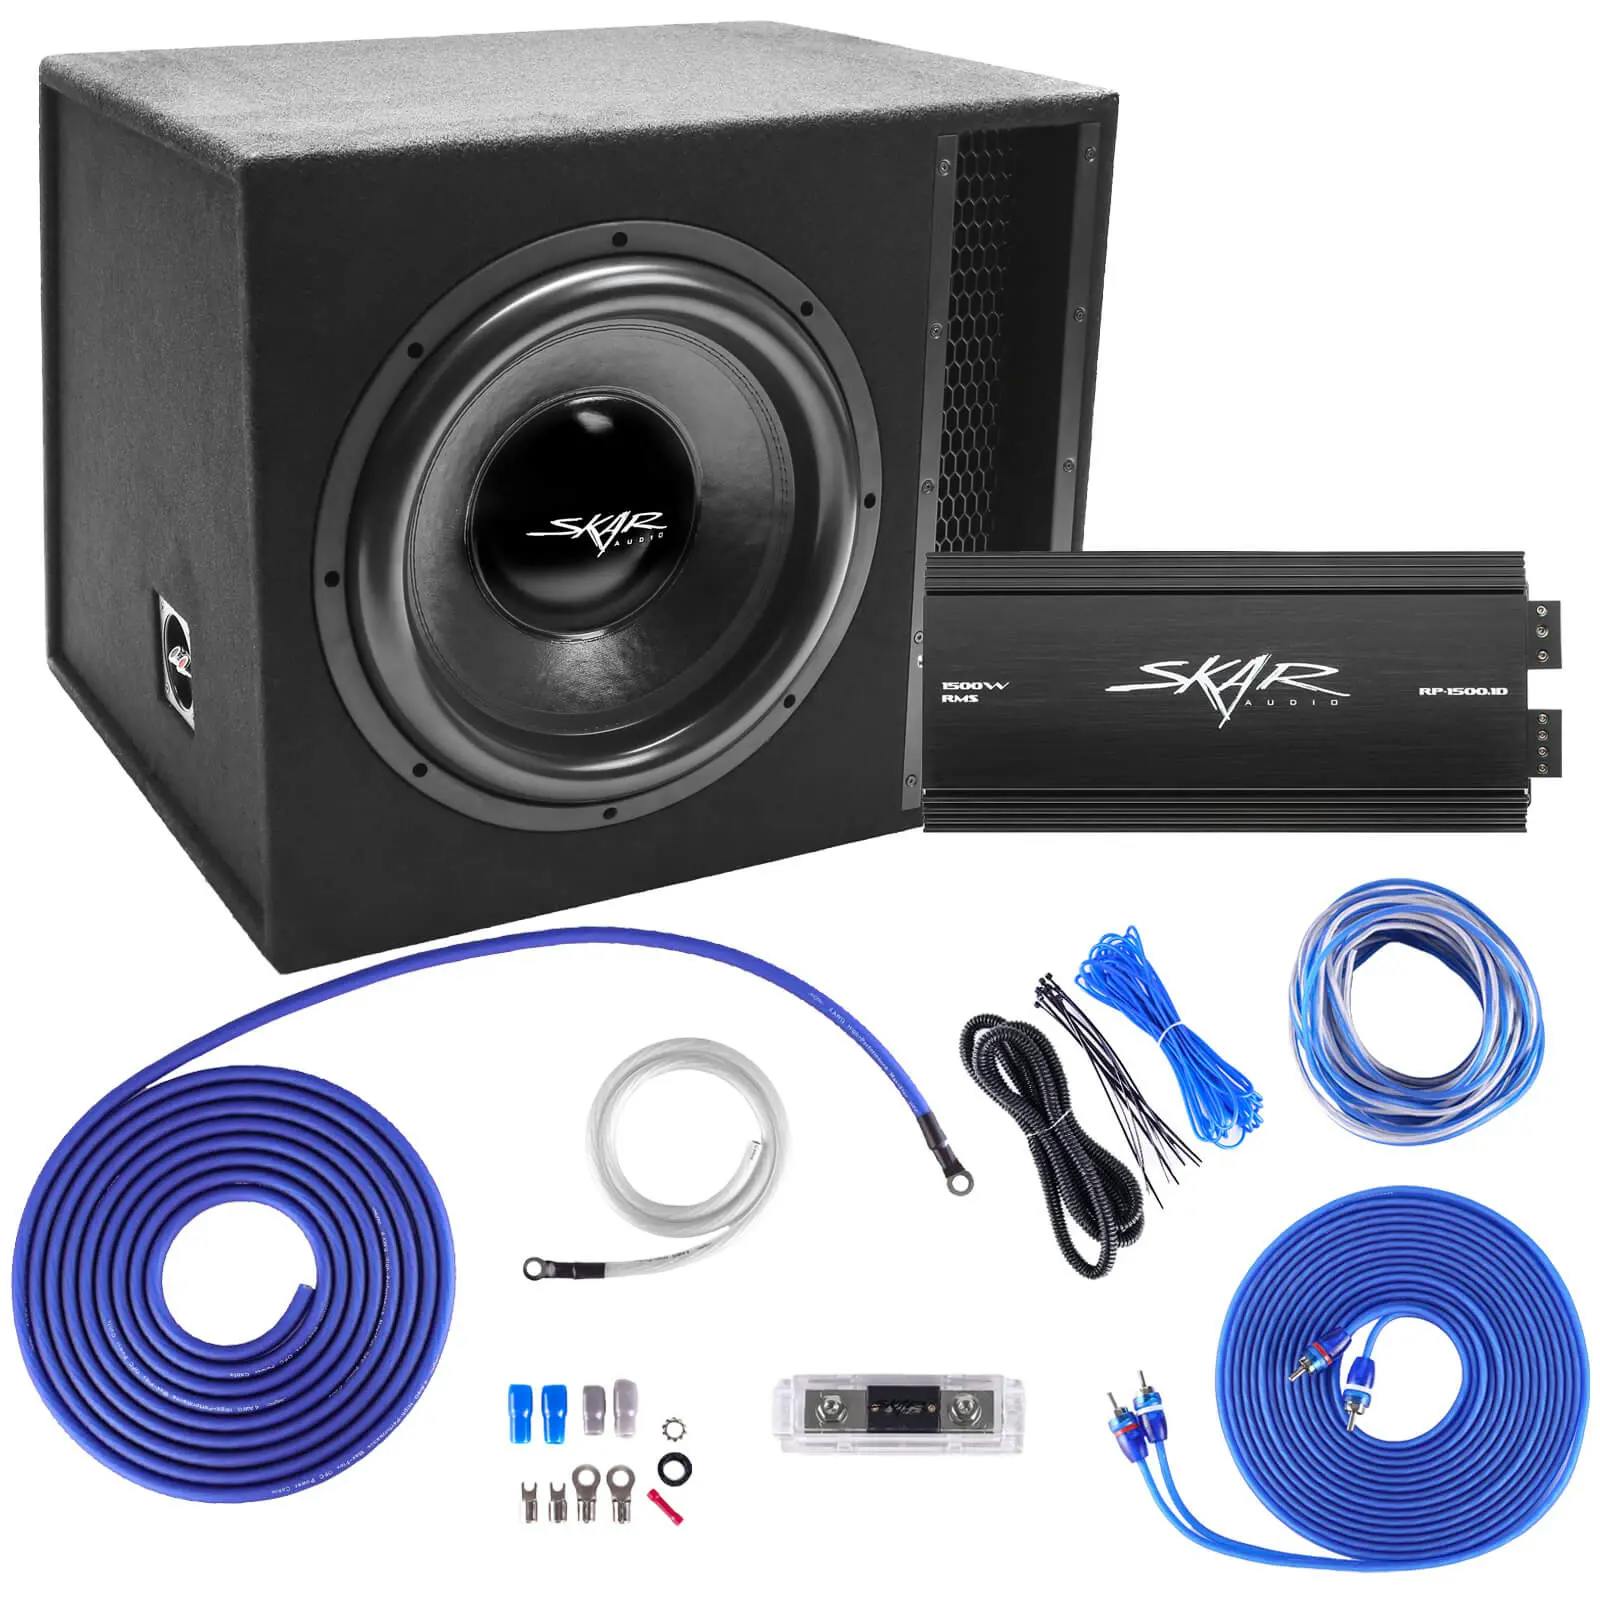 Featured Product Photo for Single 15" 2,500 Watt EVL Series Complete Subwoofer Package with Vented Enclosure and Amplifier